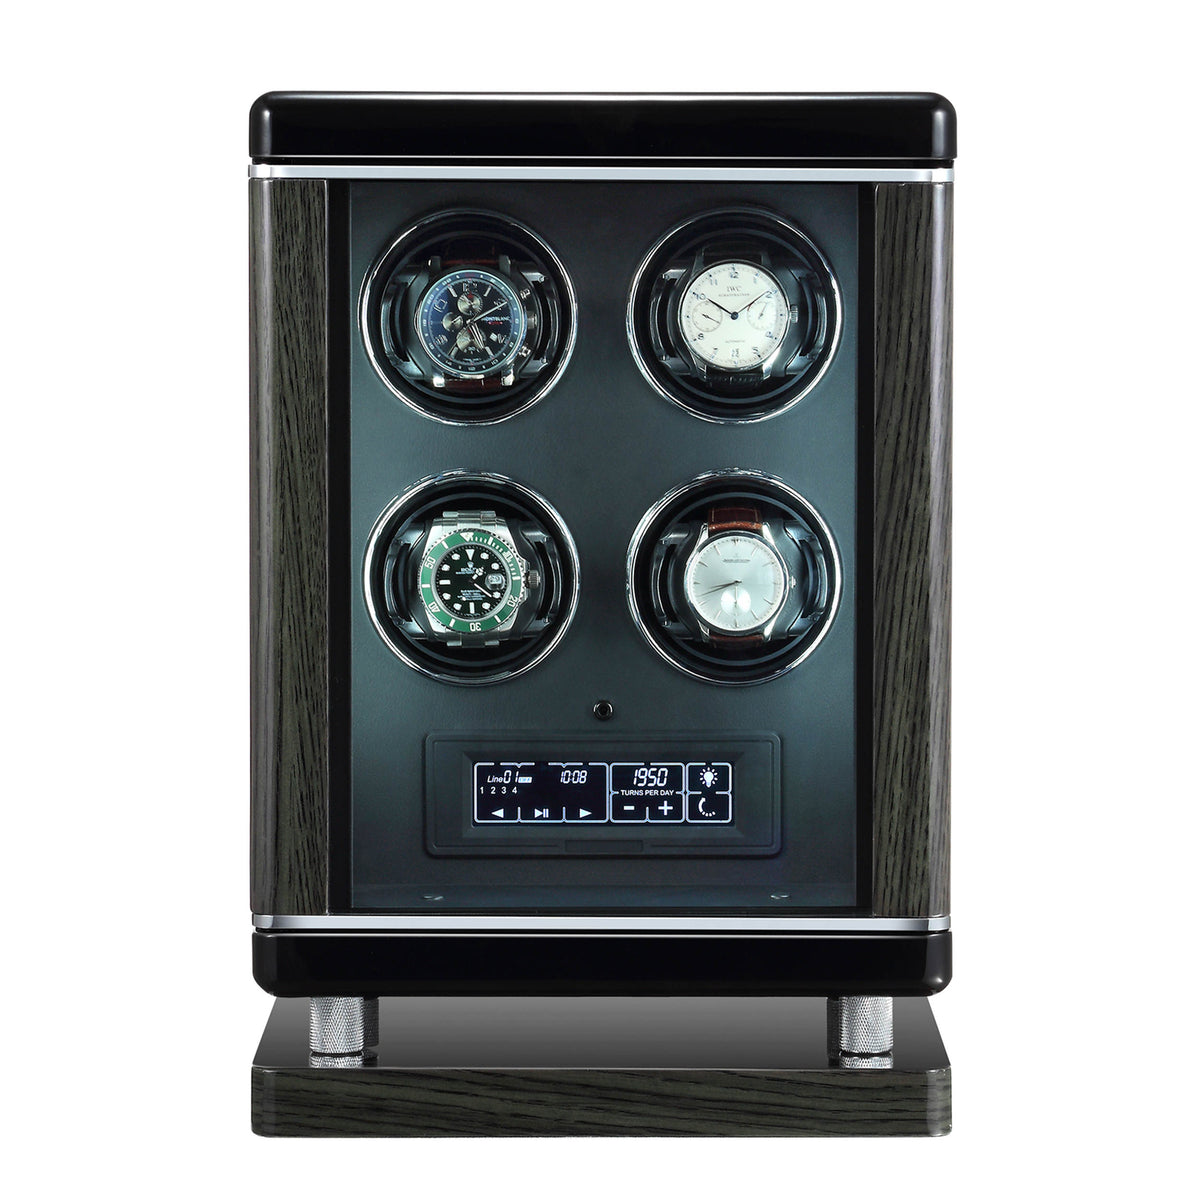 4 Watch Winder for Automatic Watches with BioMetric Technology by Tempus